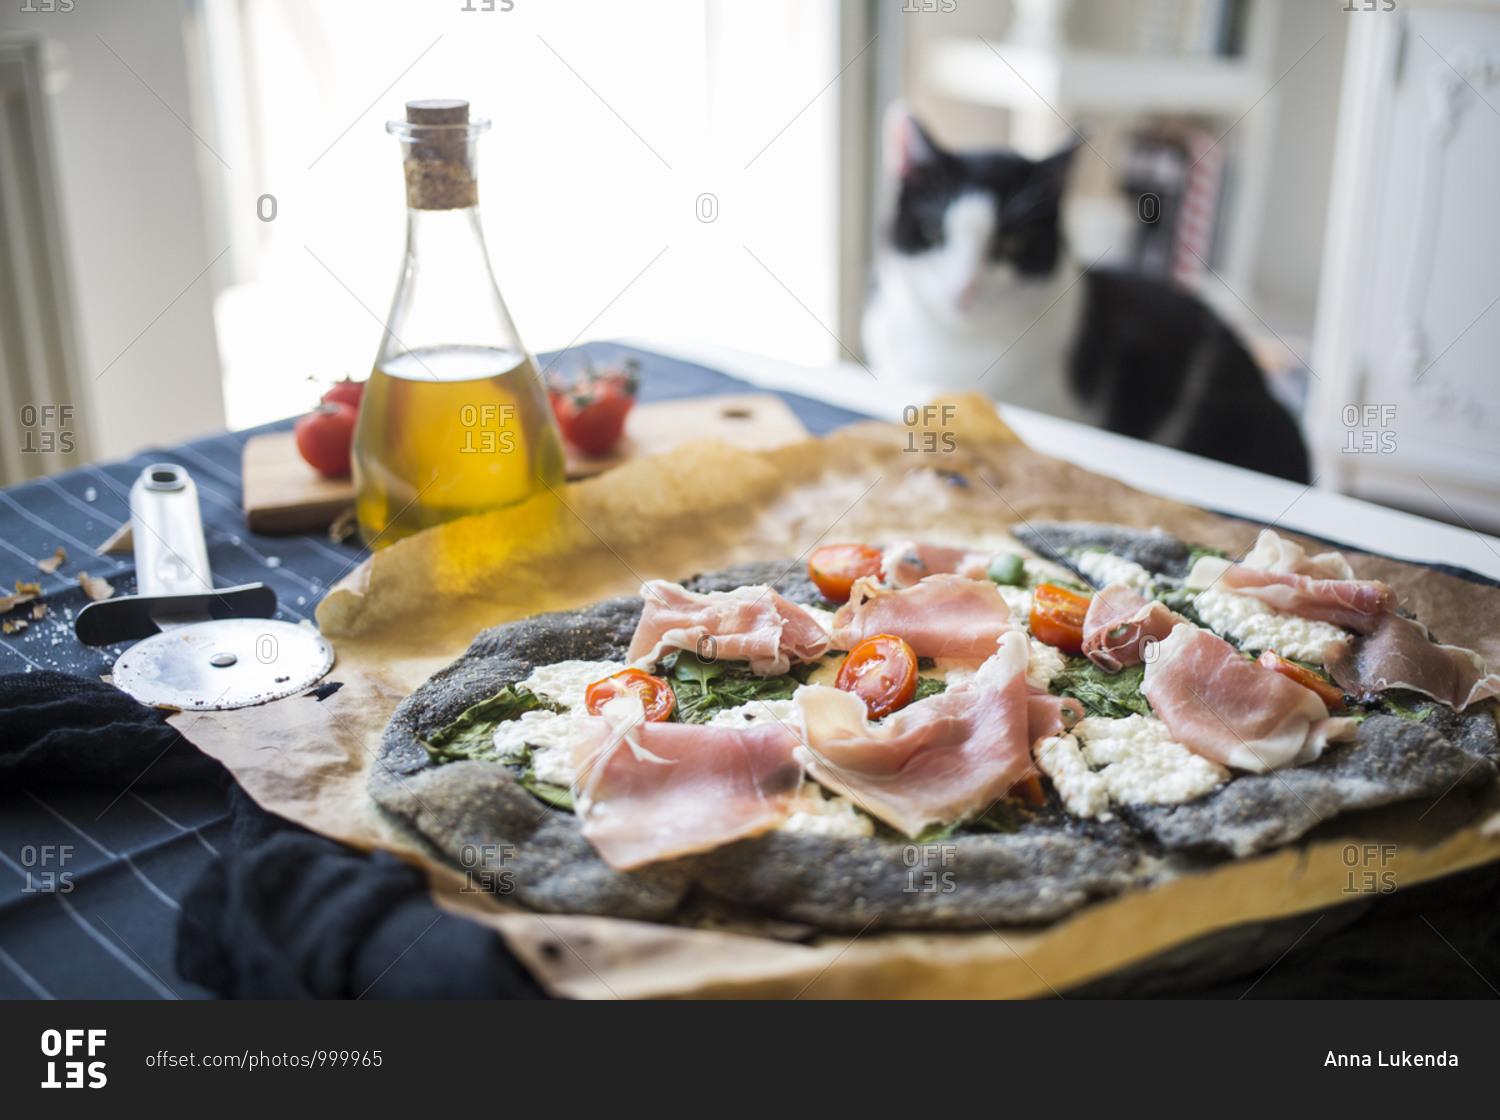 Cat overlooking a black pizza with spinach, prosciutto, tomatoes and homemade goat cheese